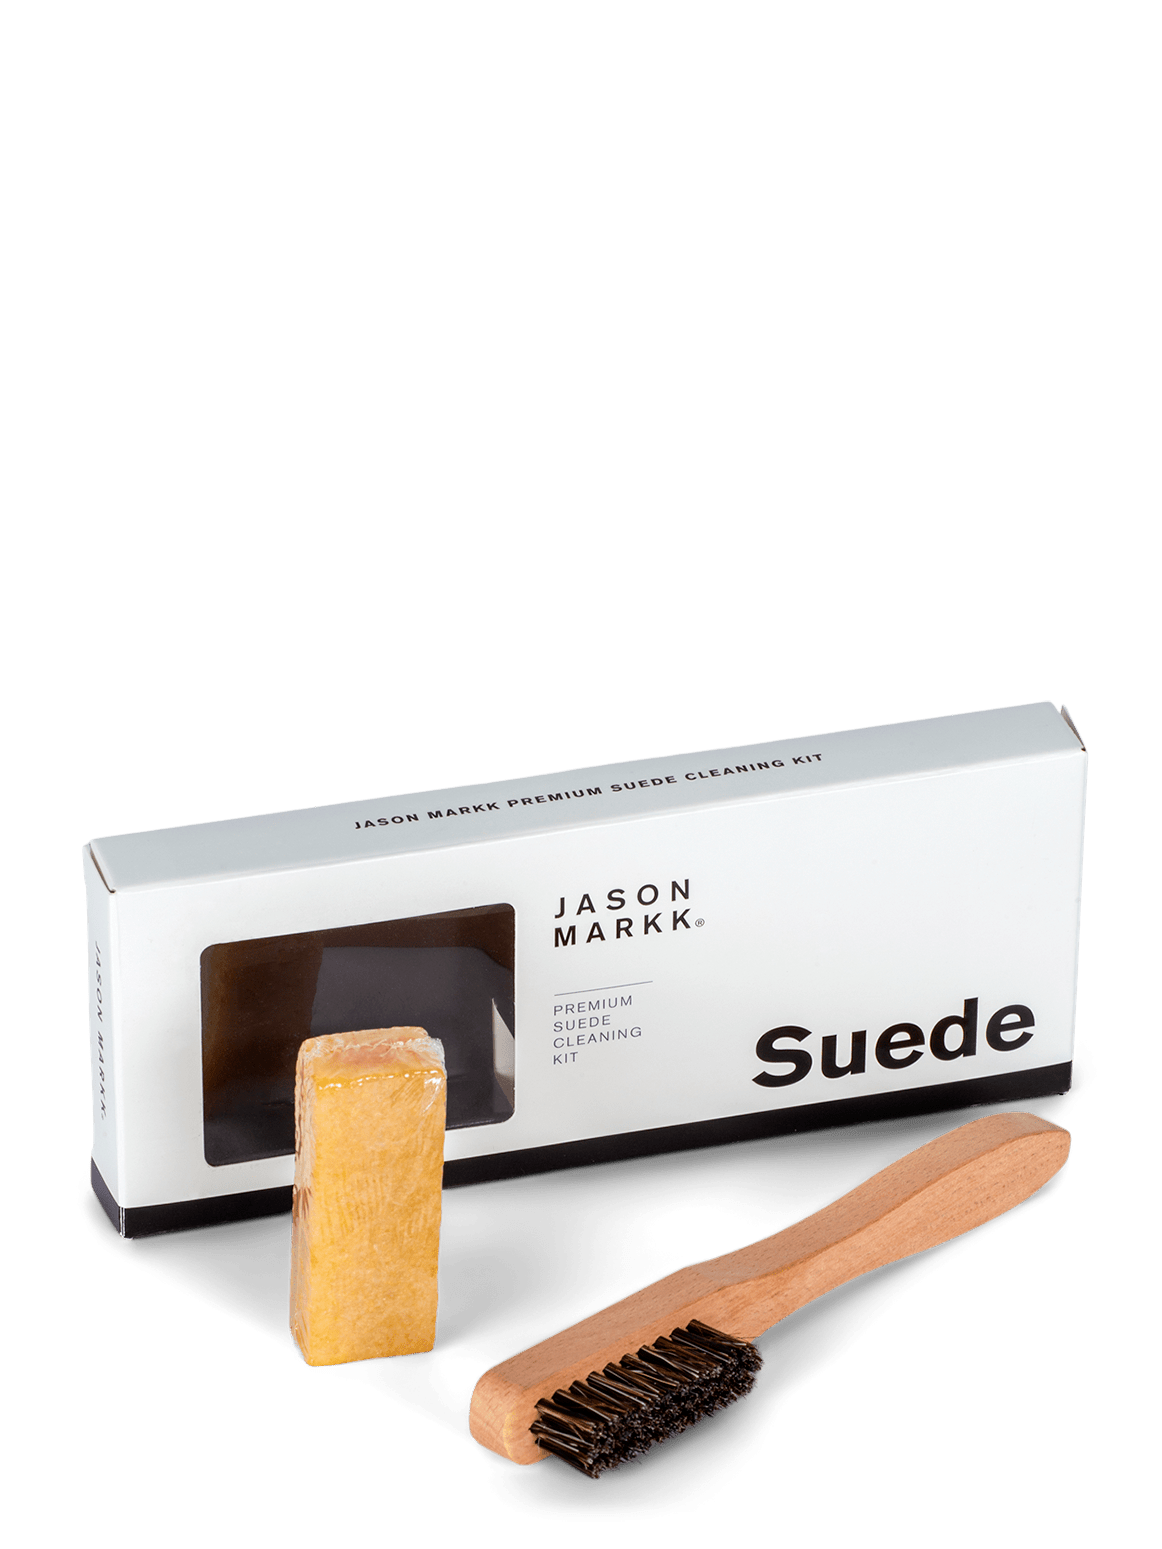 Suede cleaning kit